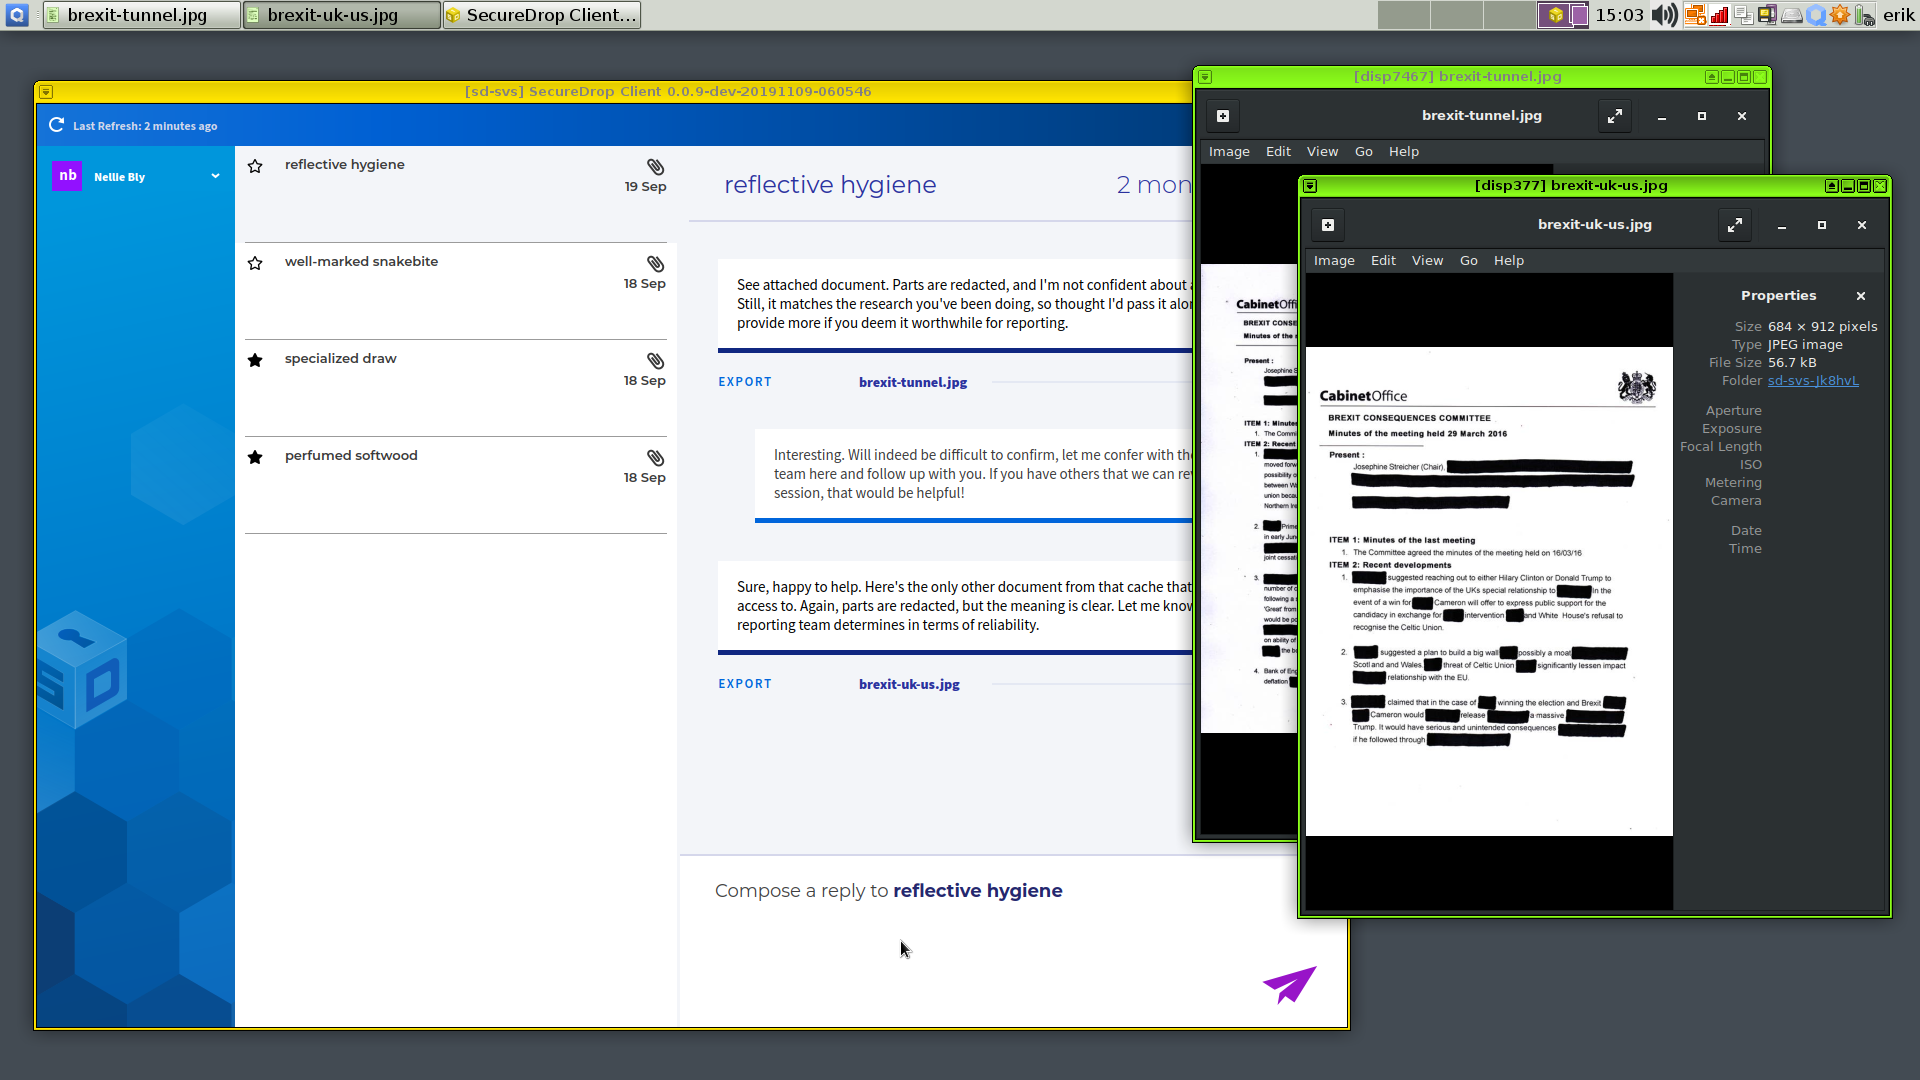 Example of viewing submitted documents inside Qubes OS using the SecureDrop Client